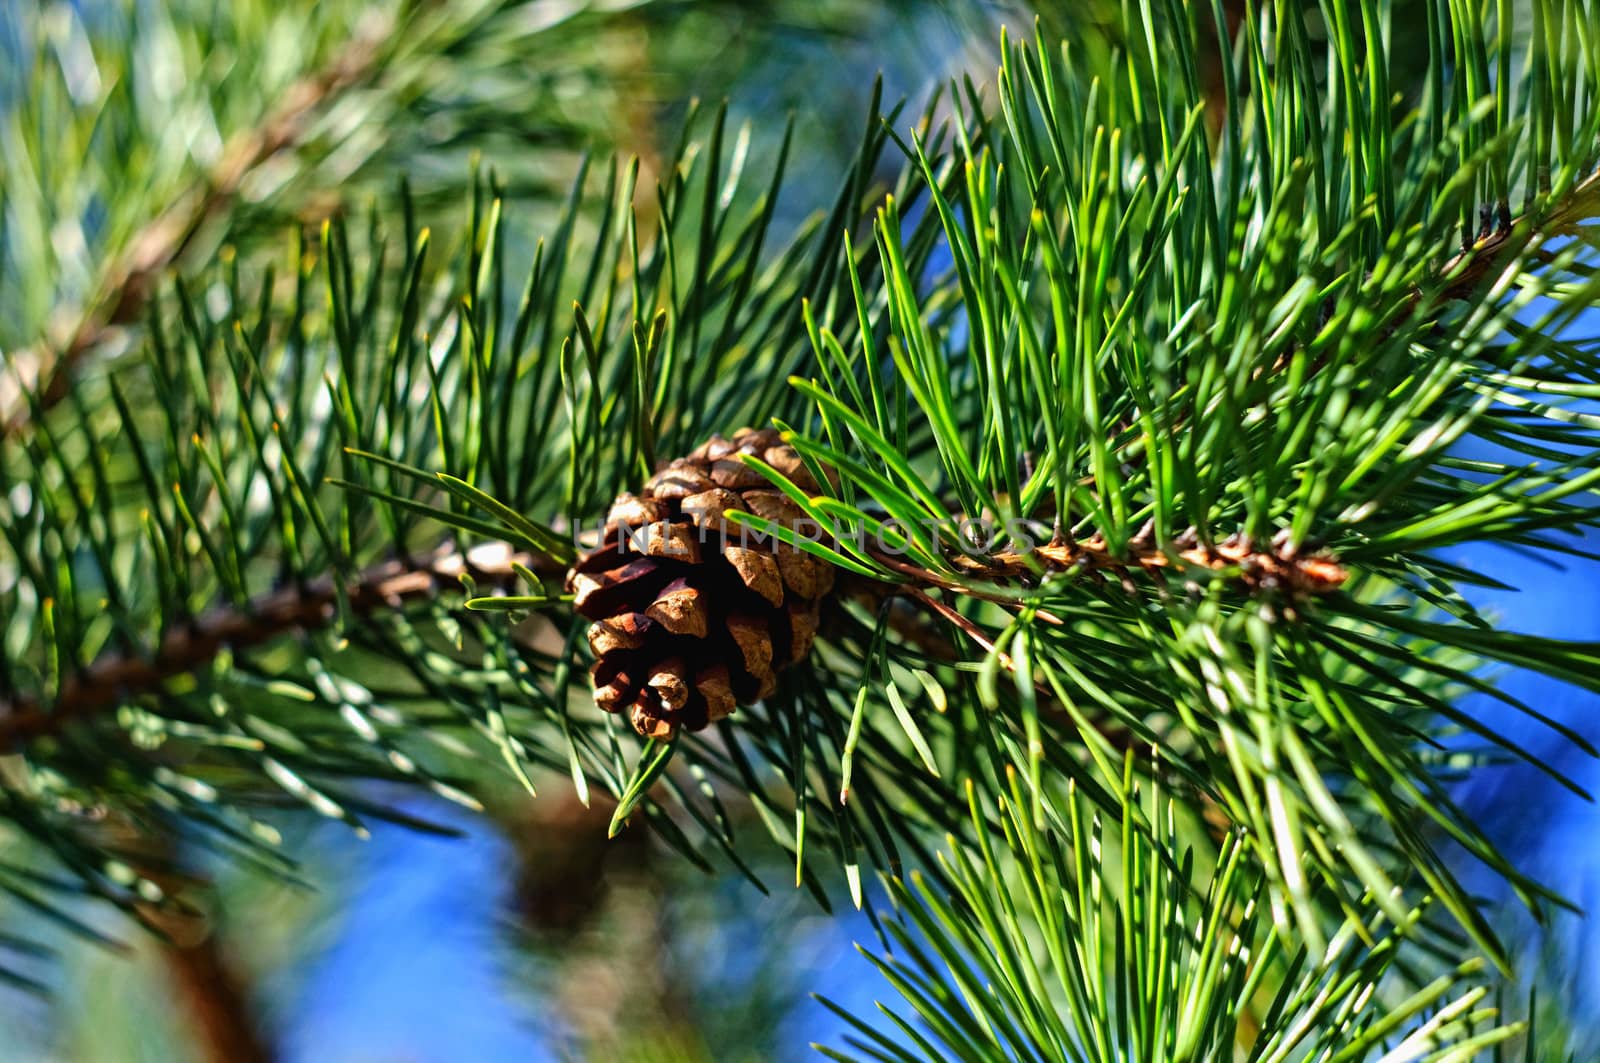 Colorful fresh green young pine branch with a cone close-up, Sergiev Posad, Moscow region, Russia